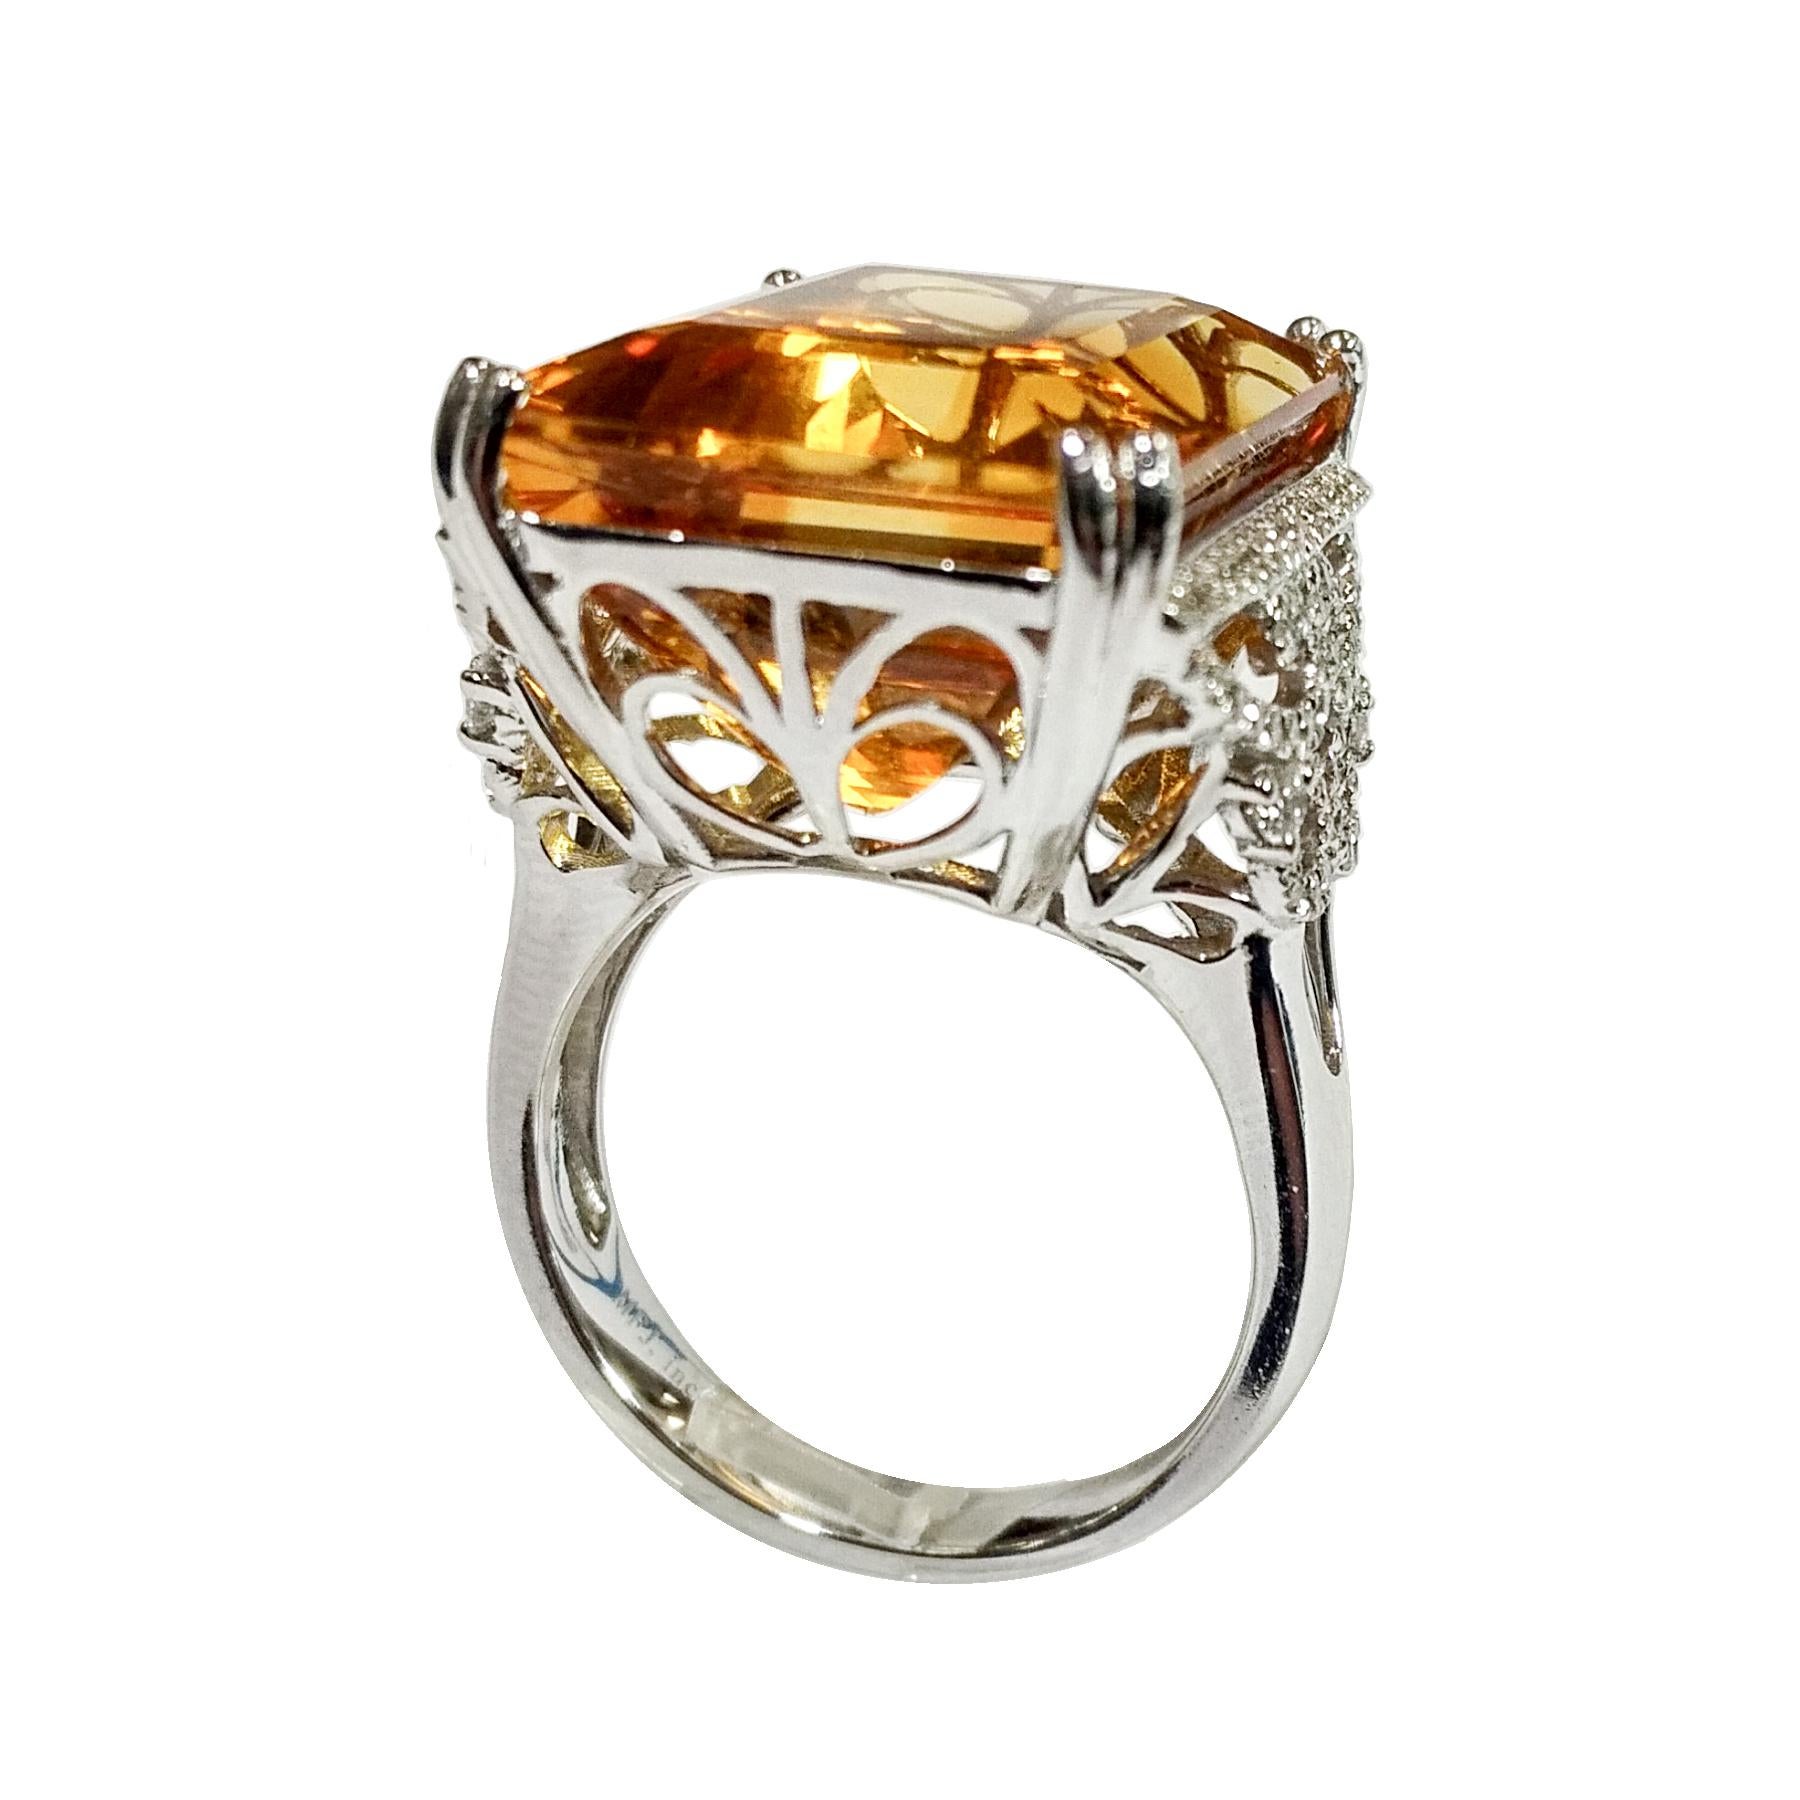 Emerald Cut Citrine 20.85 Carats White Gold Cocktail Ring